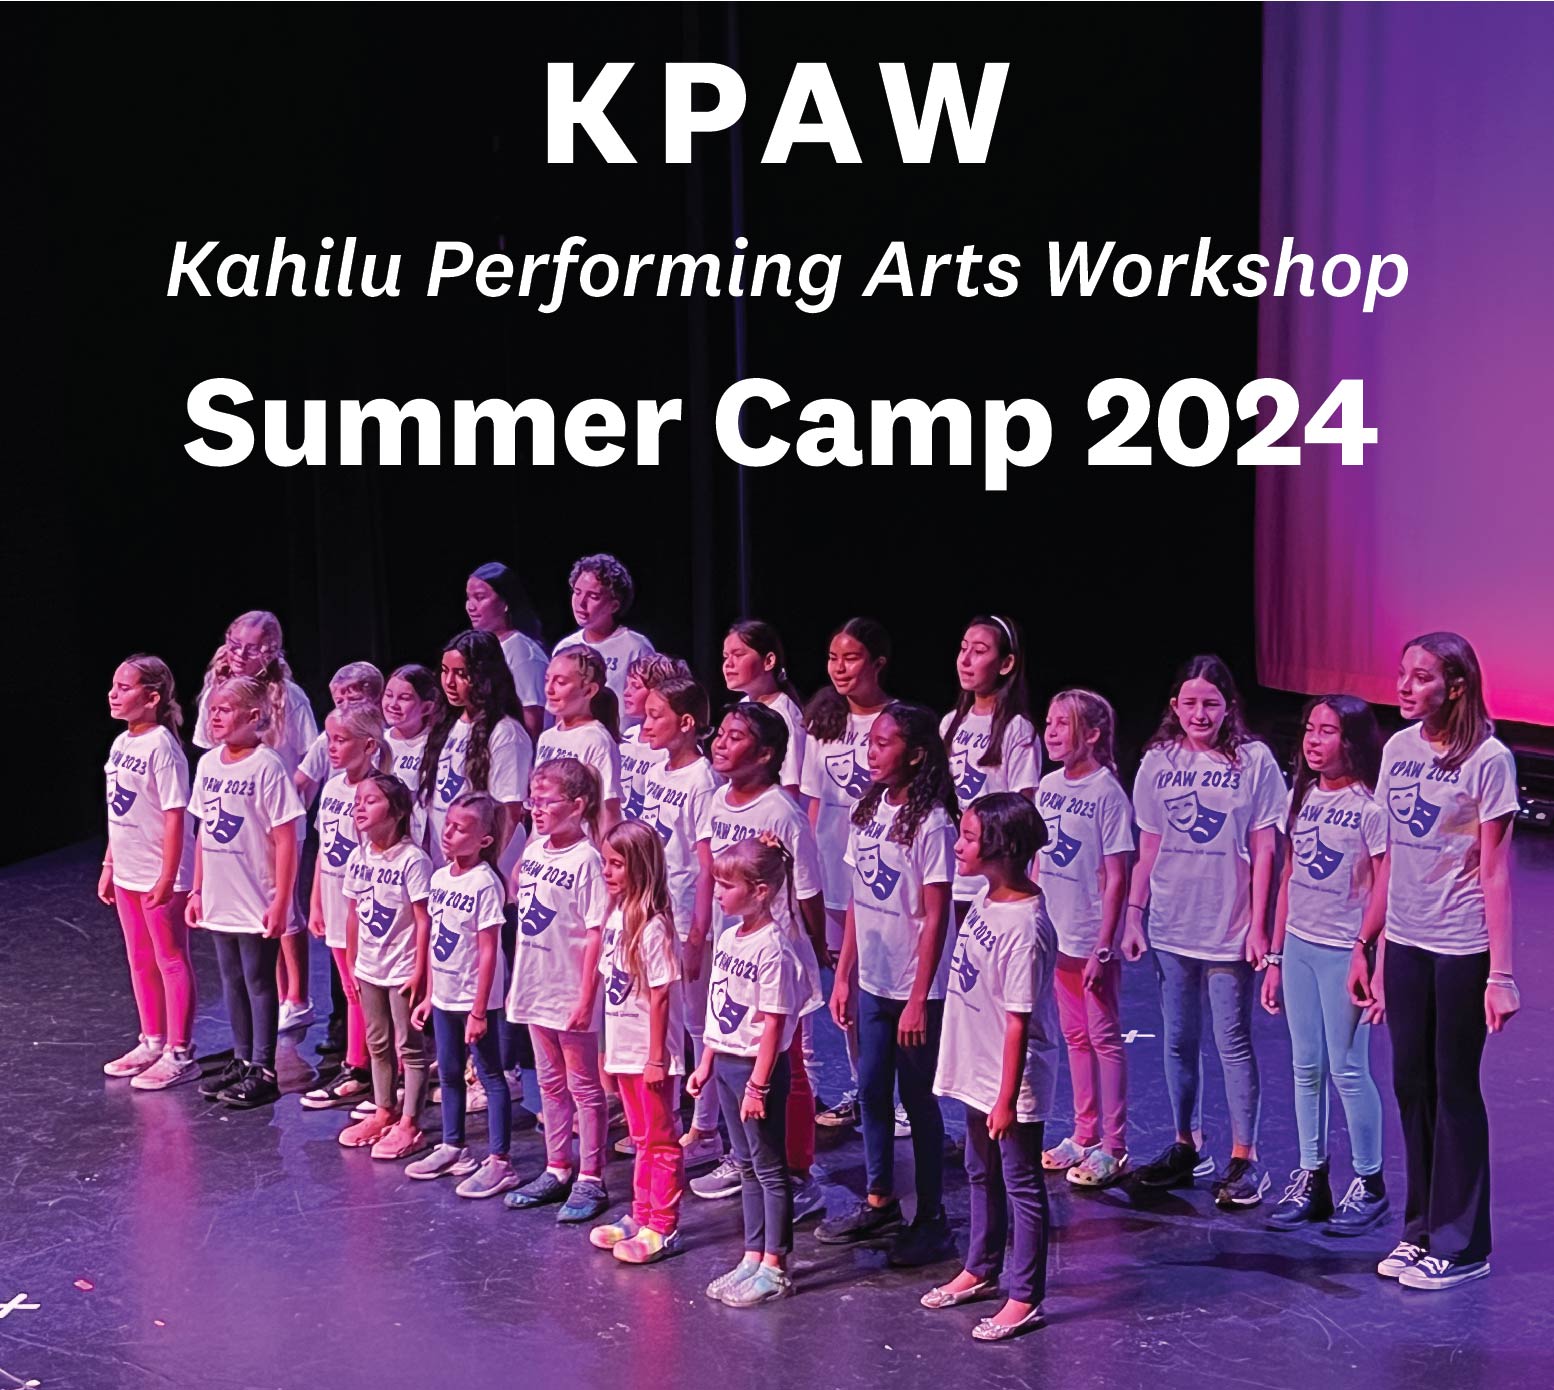 Group of children on stage wearing matching t-shirts for the kpaw summer camp 2024 at kahilu performing arts workshop.